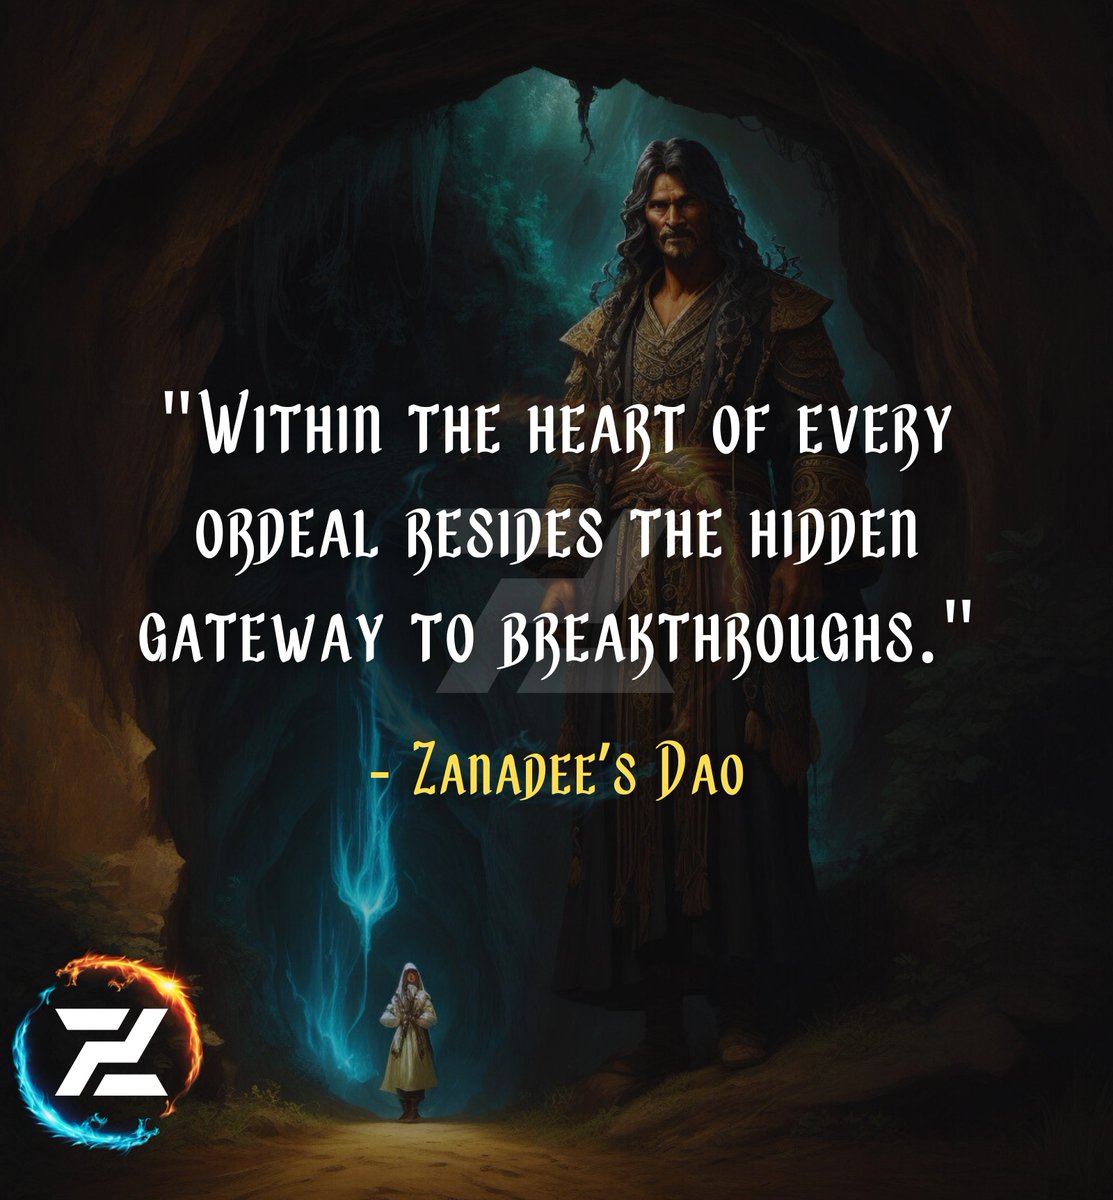 Ordeal's Gateway

'Within the heart of every ordeal resides the hidden gateway to breakthroughs.'

#Breakthroughs #Spirituality #PersonalGrowth #Resilience #Obstacles #Transformation

Zanadee’s Dao